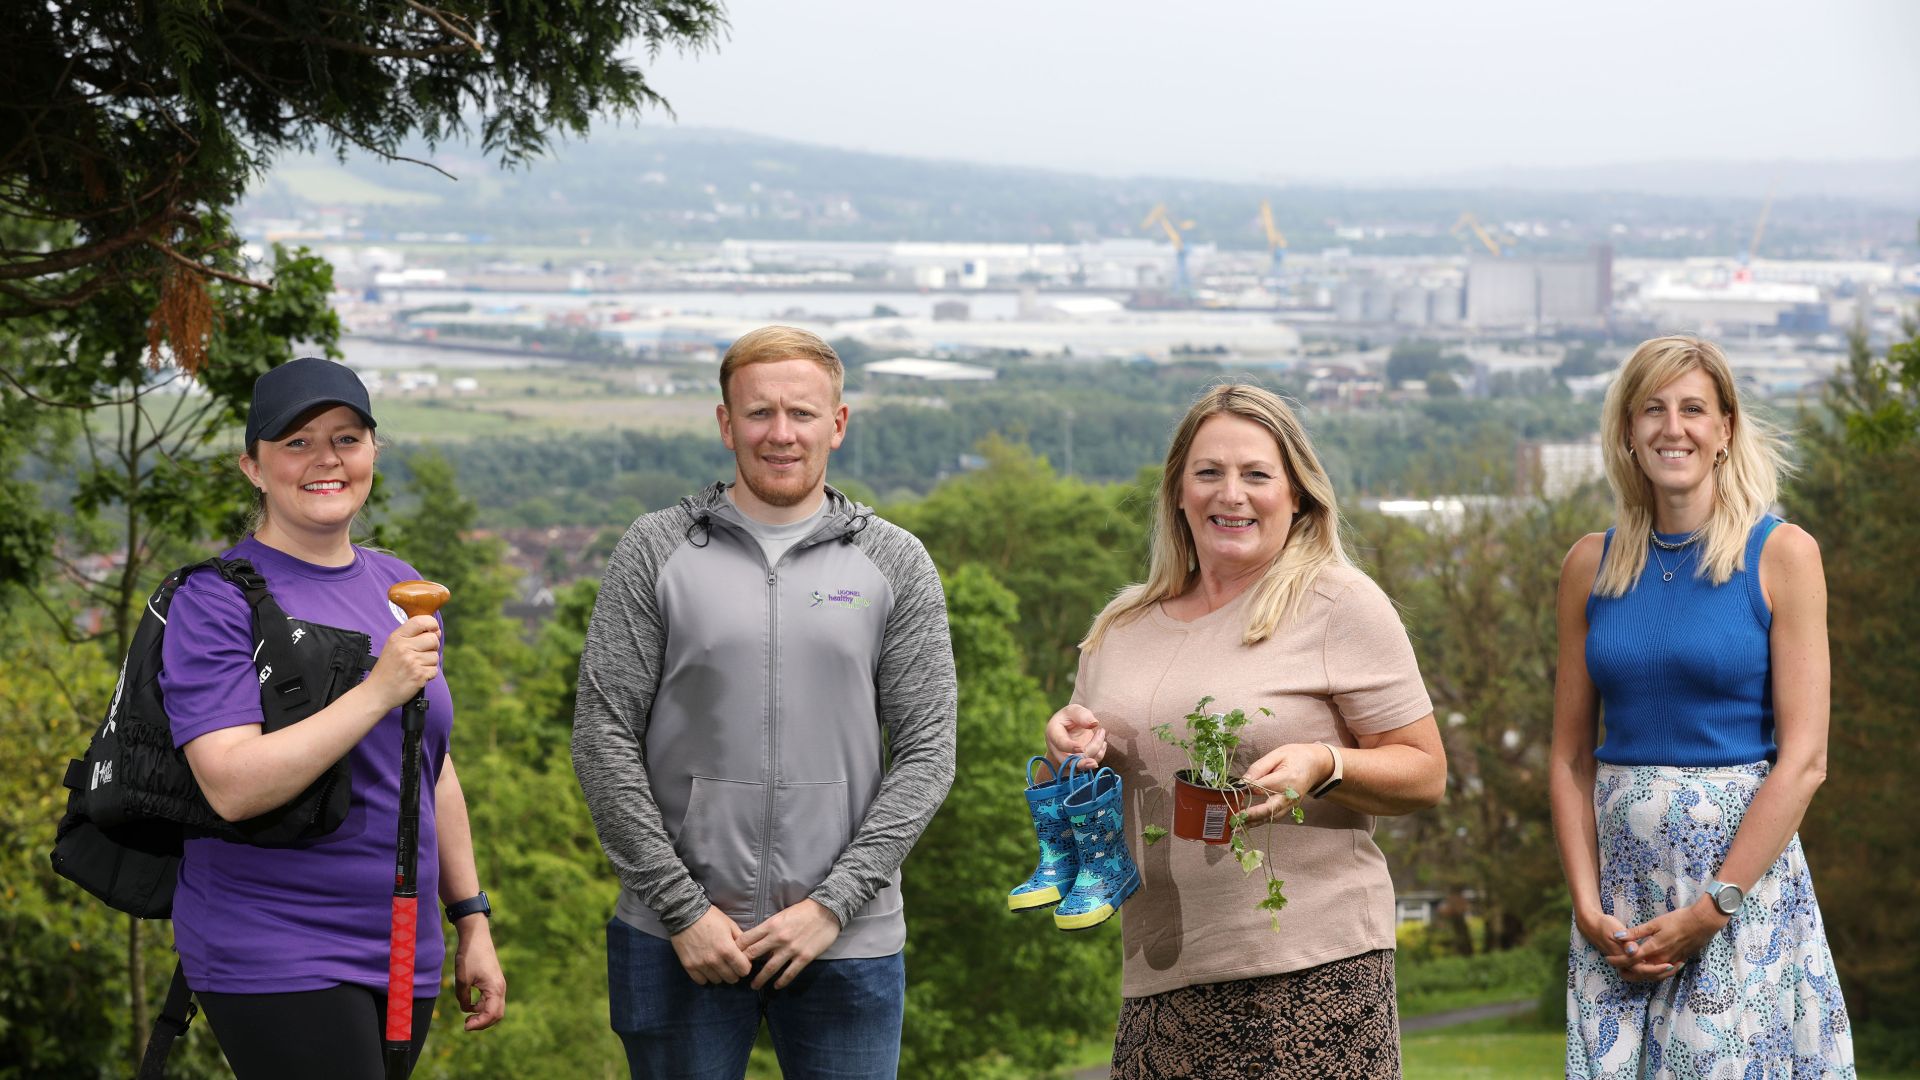 Belfast Harbour Awards £25,000 to Community Projects